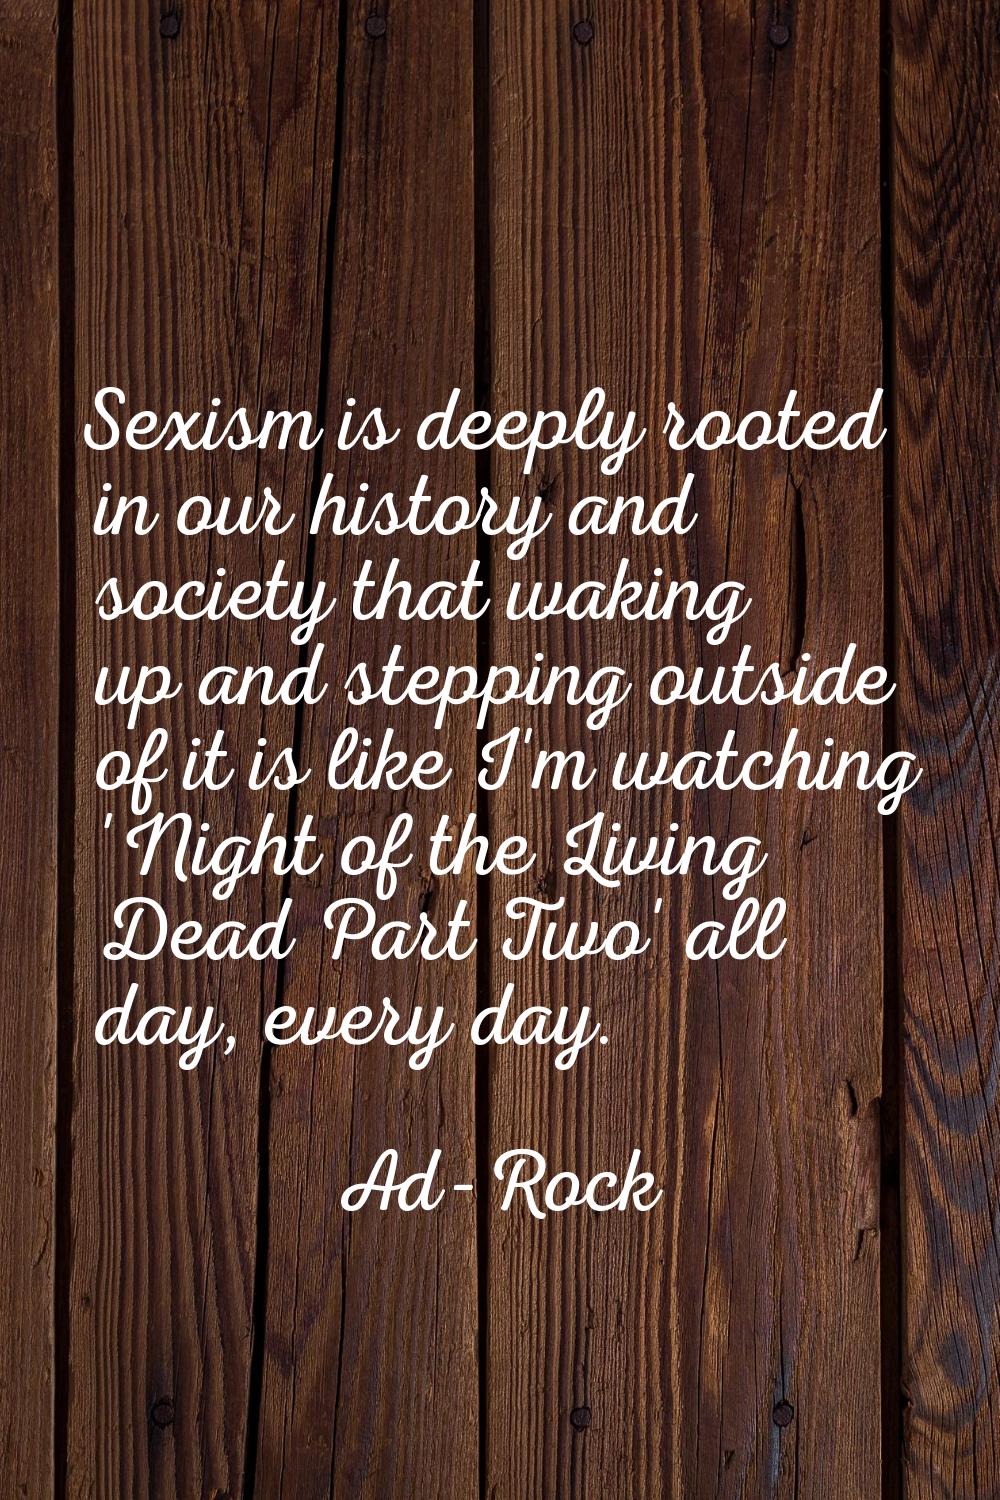 Sexism is deeply rooted in our history and society that waking up and stepping outside of it is lik